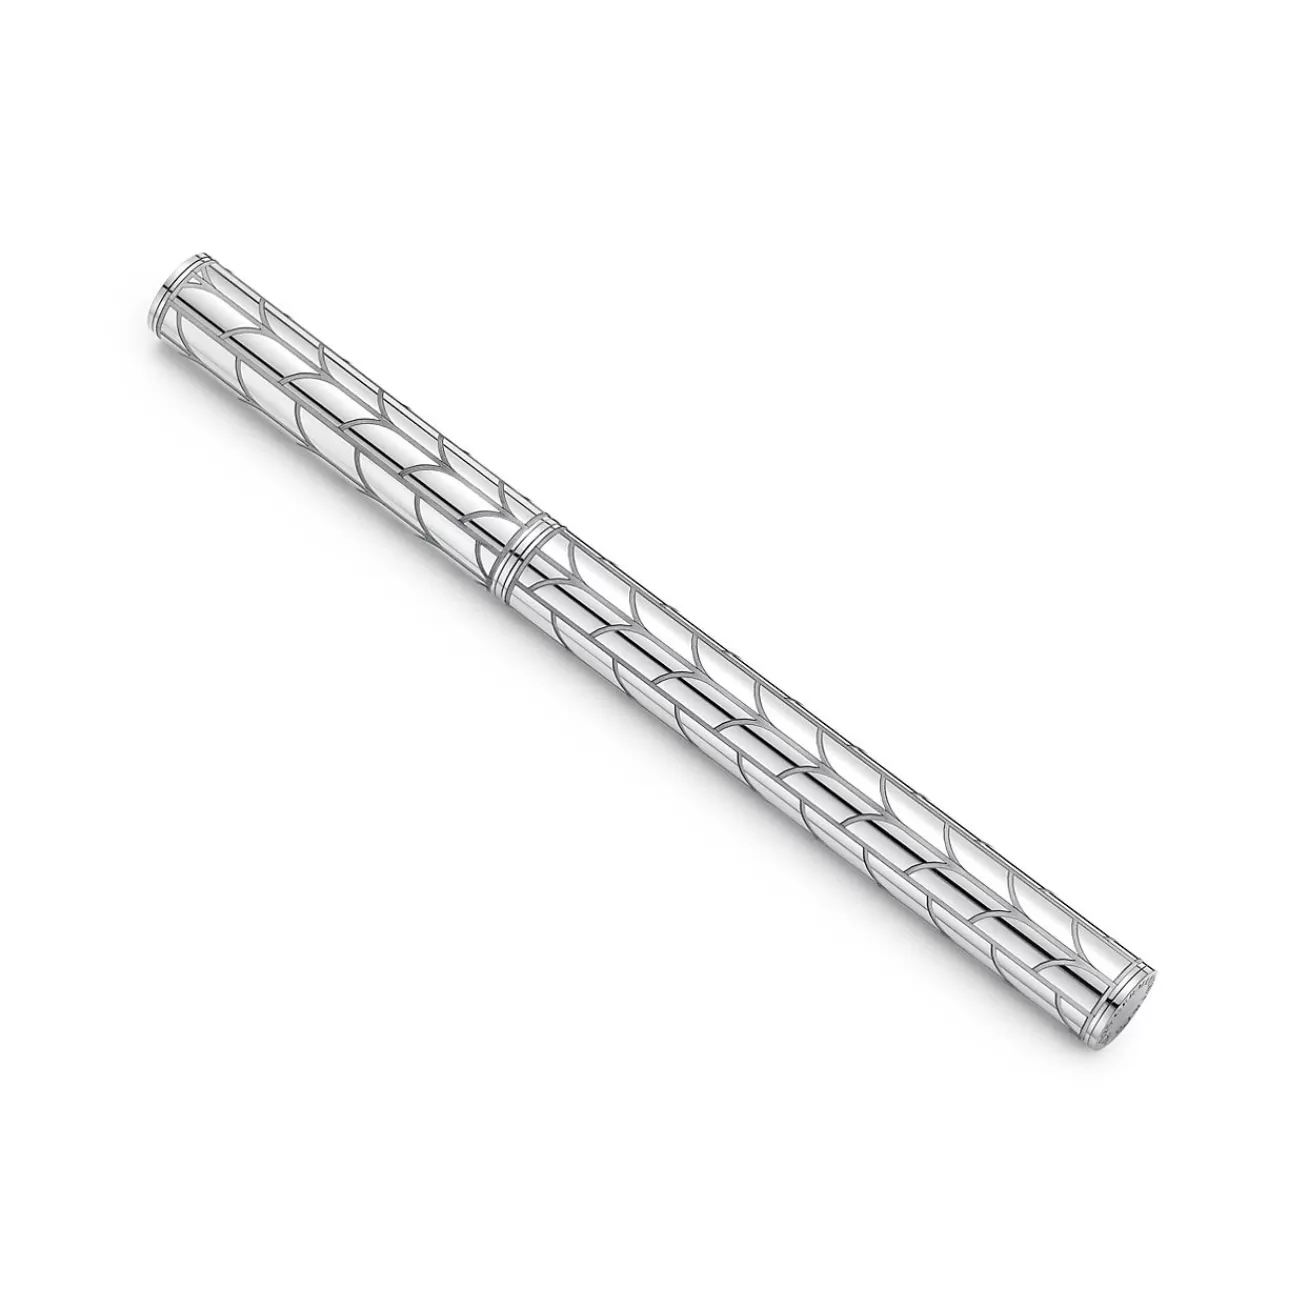 Tiffany & Co. Wheat Leaf Rollerball Pen in Sterling Silver | ^ Stationery, Games & Unique Objects | Games & Novelties